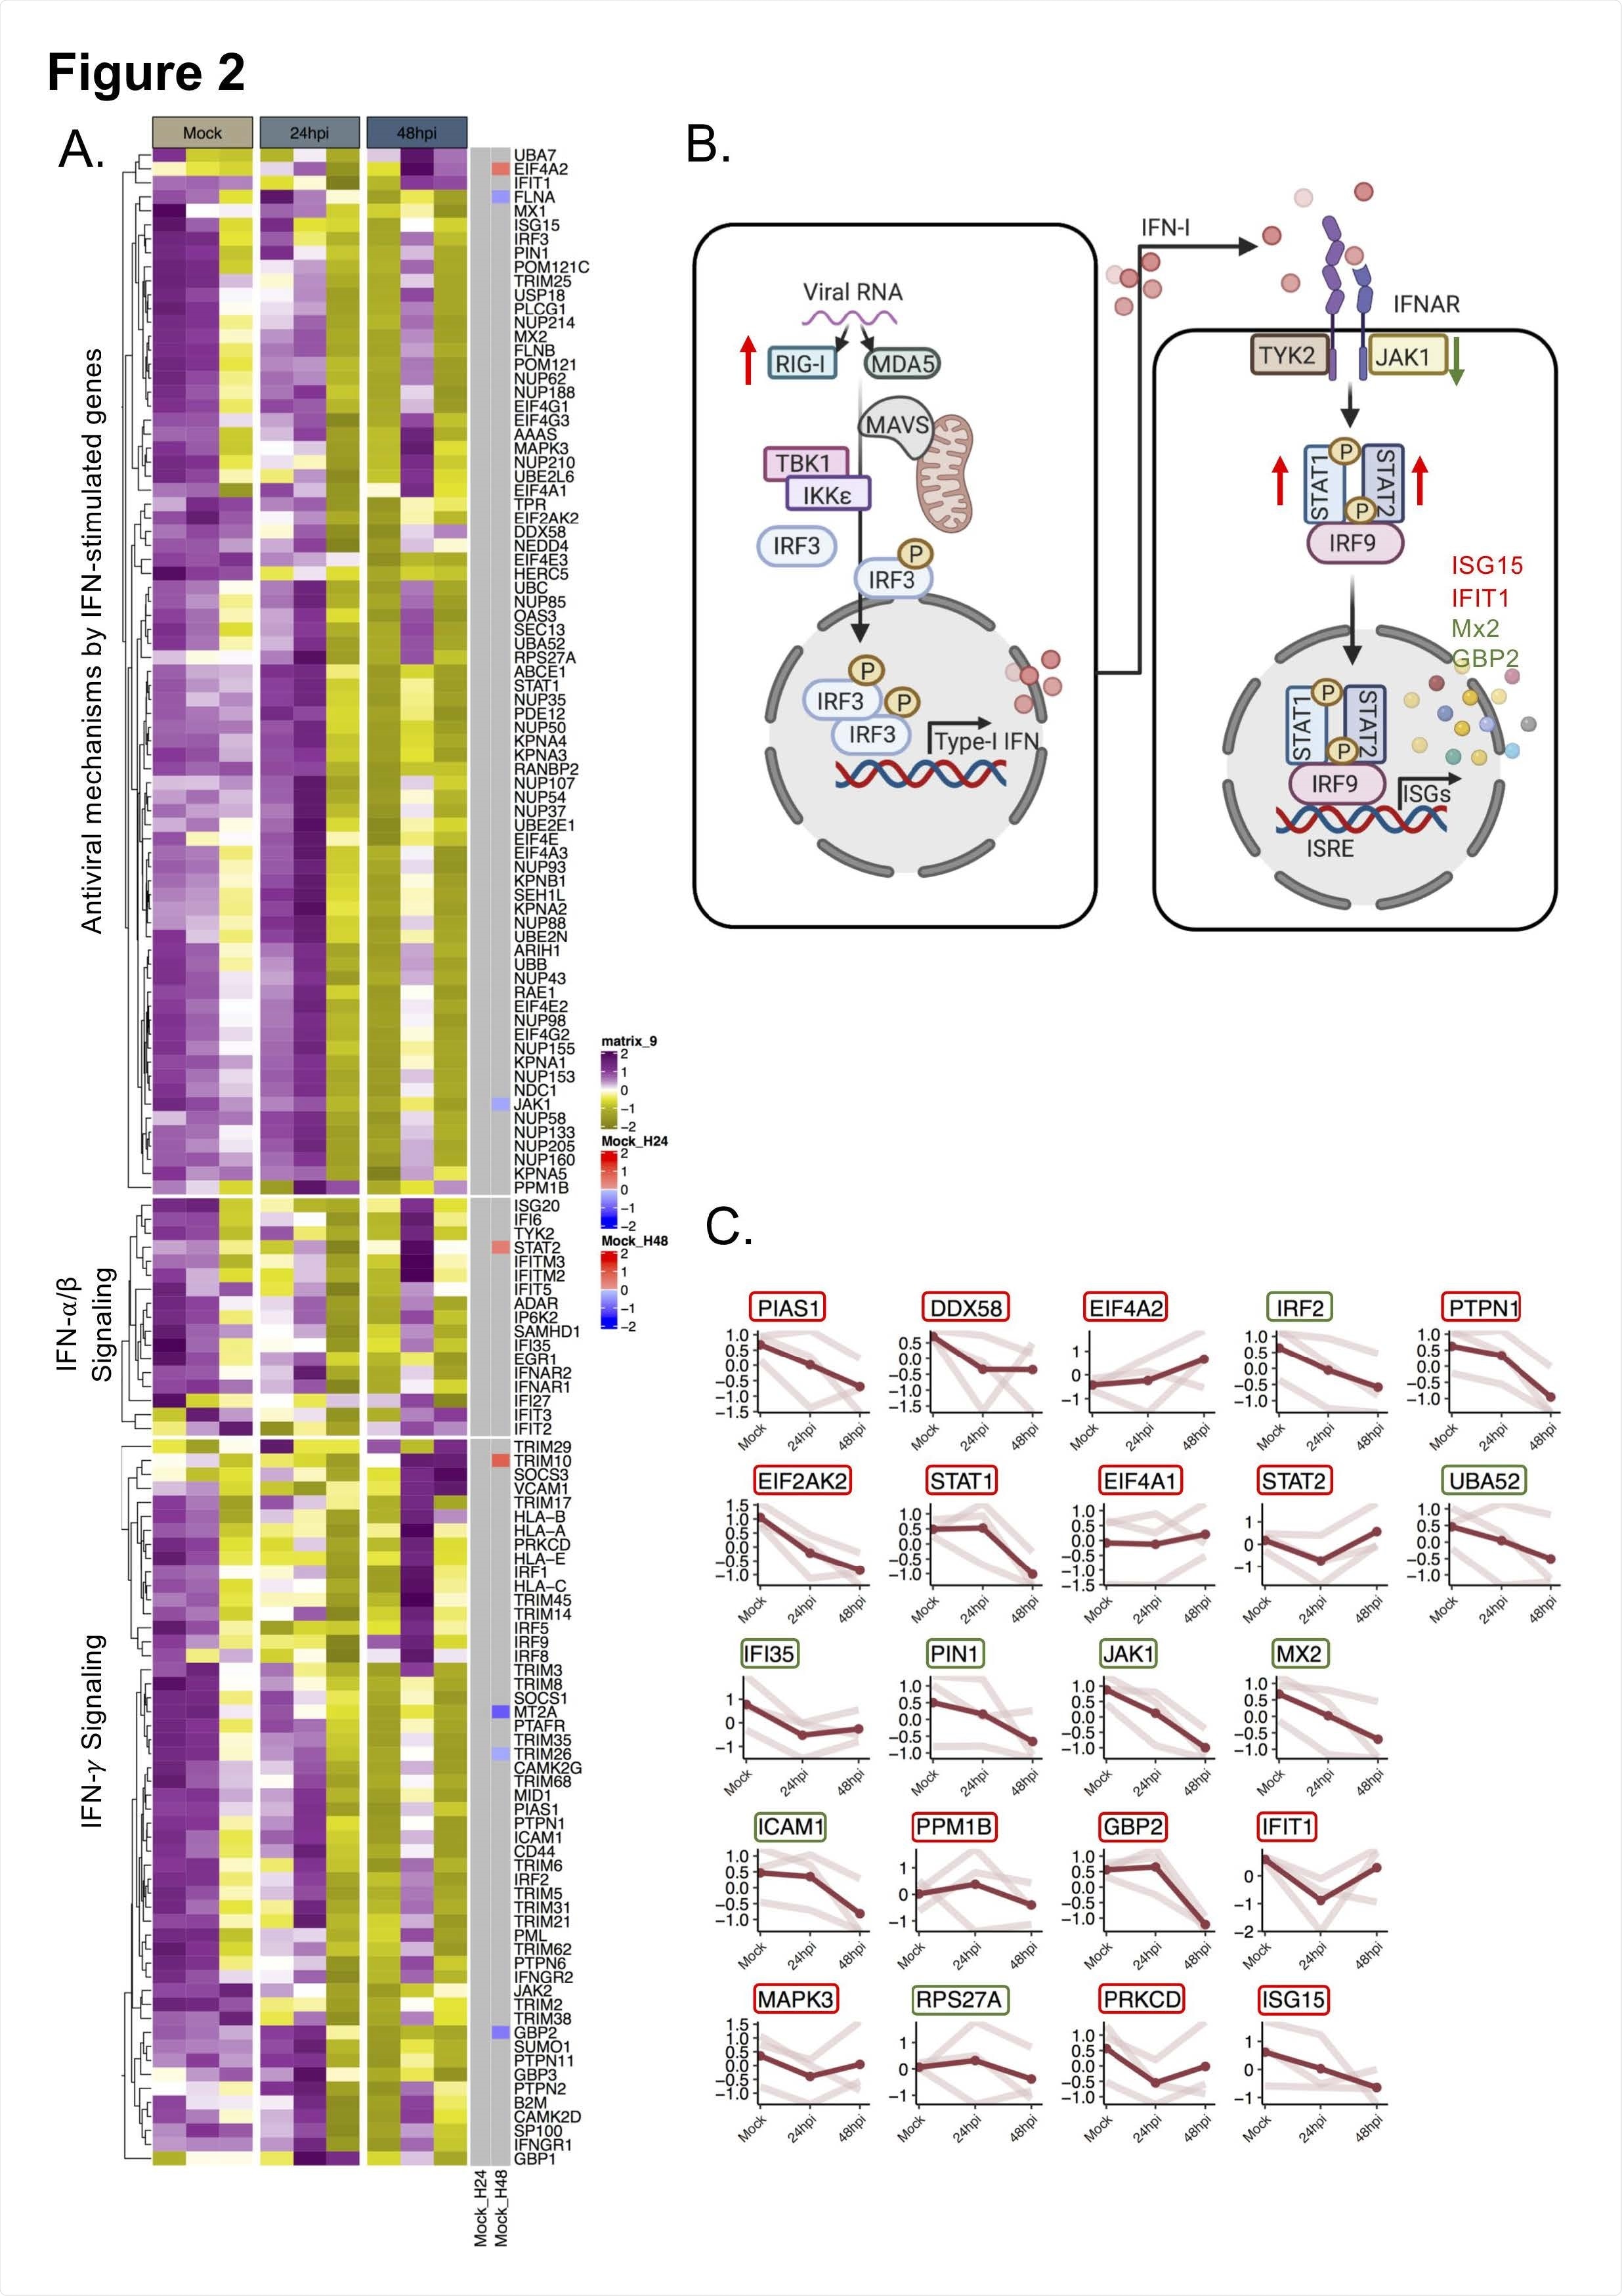 SARS-CoV-2 induced transcriptional changes in the IFN-signaling genes in transcriptomics data. A) Heatmap of IFN-stimulated transcripts before infection and at 24 and 48hpi. Data were log2 normalized and Z-score transformed. Lower values are represented in yellow and higher values in purple. Significant differential expressed genes between time points are indicated in blue if downregulated and in red if up regulated. B) The scheme graph of the type I interferon signaling pathways, in which the regulated genes expression level trend is noted. The significantly changed proteins observed in the proteomics data are denoted by green arrows or letters (downregulated) or red arrows or letters (upregulated) C) Dot plot for each transcript that were detected as significantly altered in proteomics. For each gene, the scaled values in triplicates are represented in mock, 24hpi and 48hpi and linked by light red line, average value is displayed in red. The name of the genes is indicated in colored box based on the proteomics data. The genes corresponding to increased protein levels are in red boxes and to decreased protein levels in green boxes.